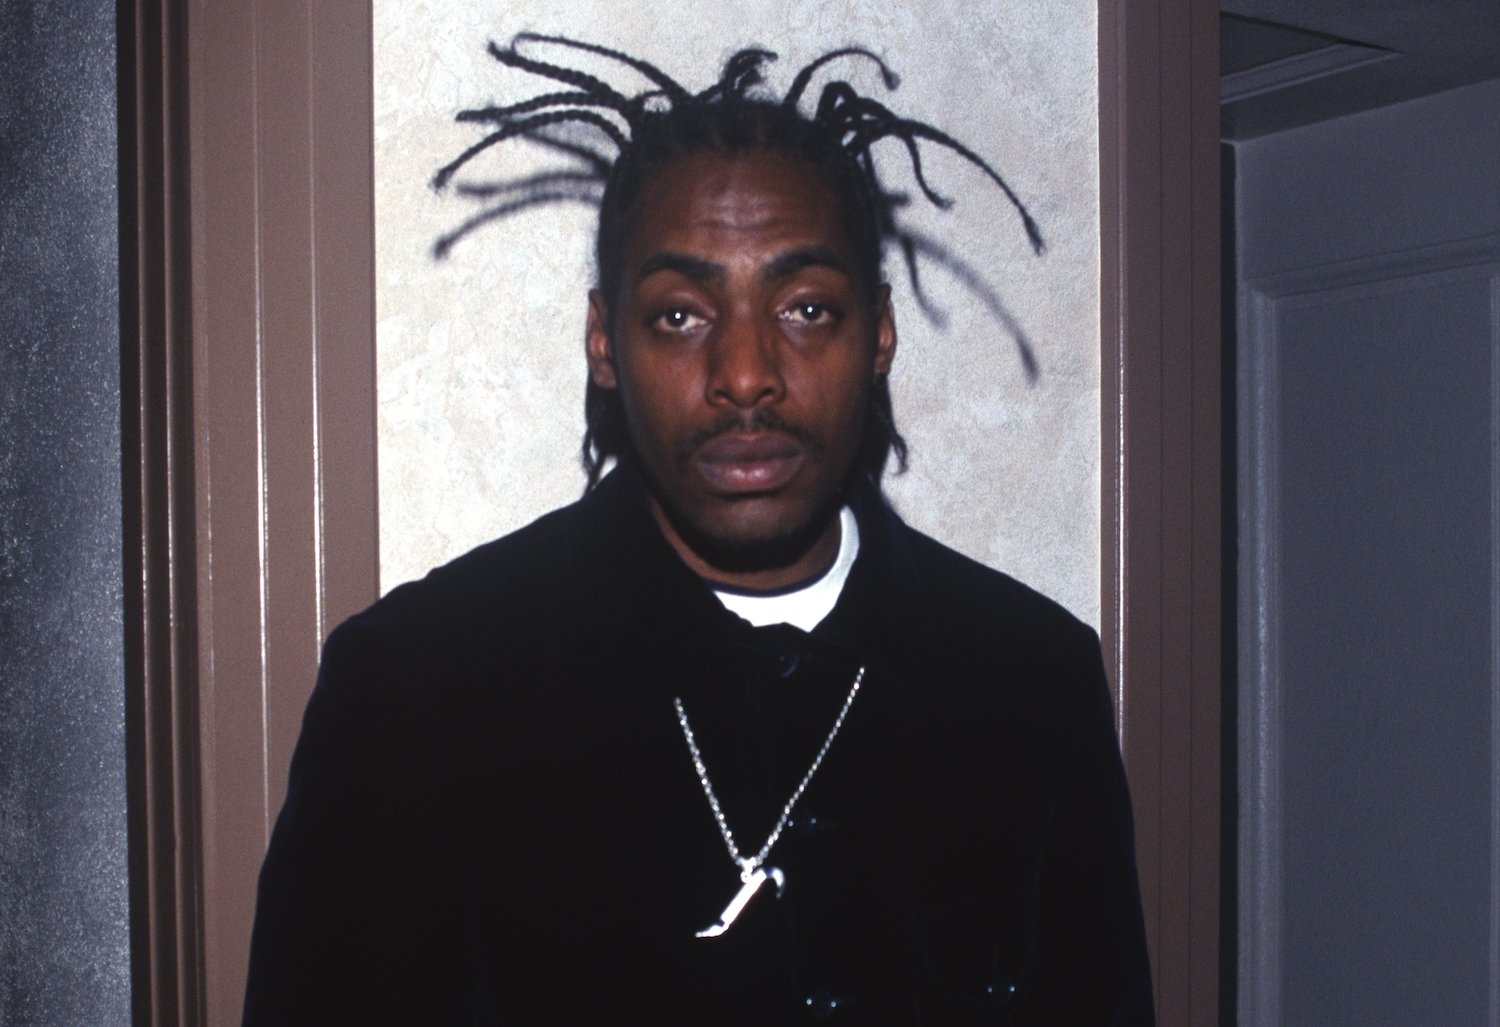 A head shot of Coolio against a neutral background. Coolio had 10 children and one ex-wife.